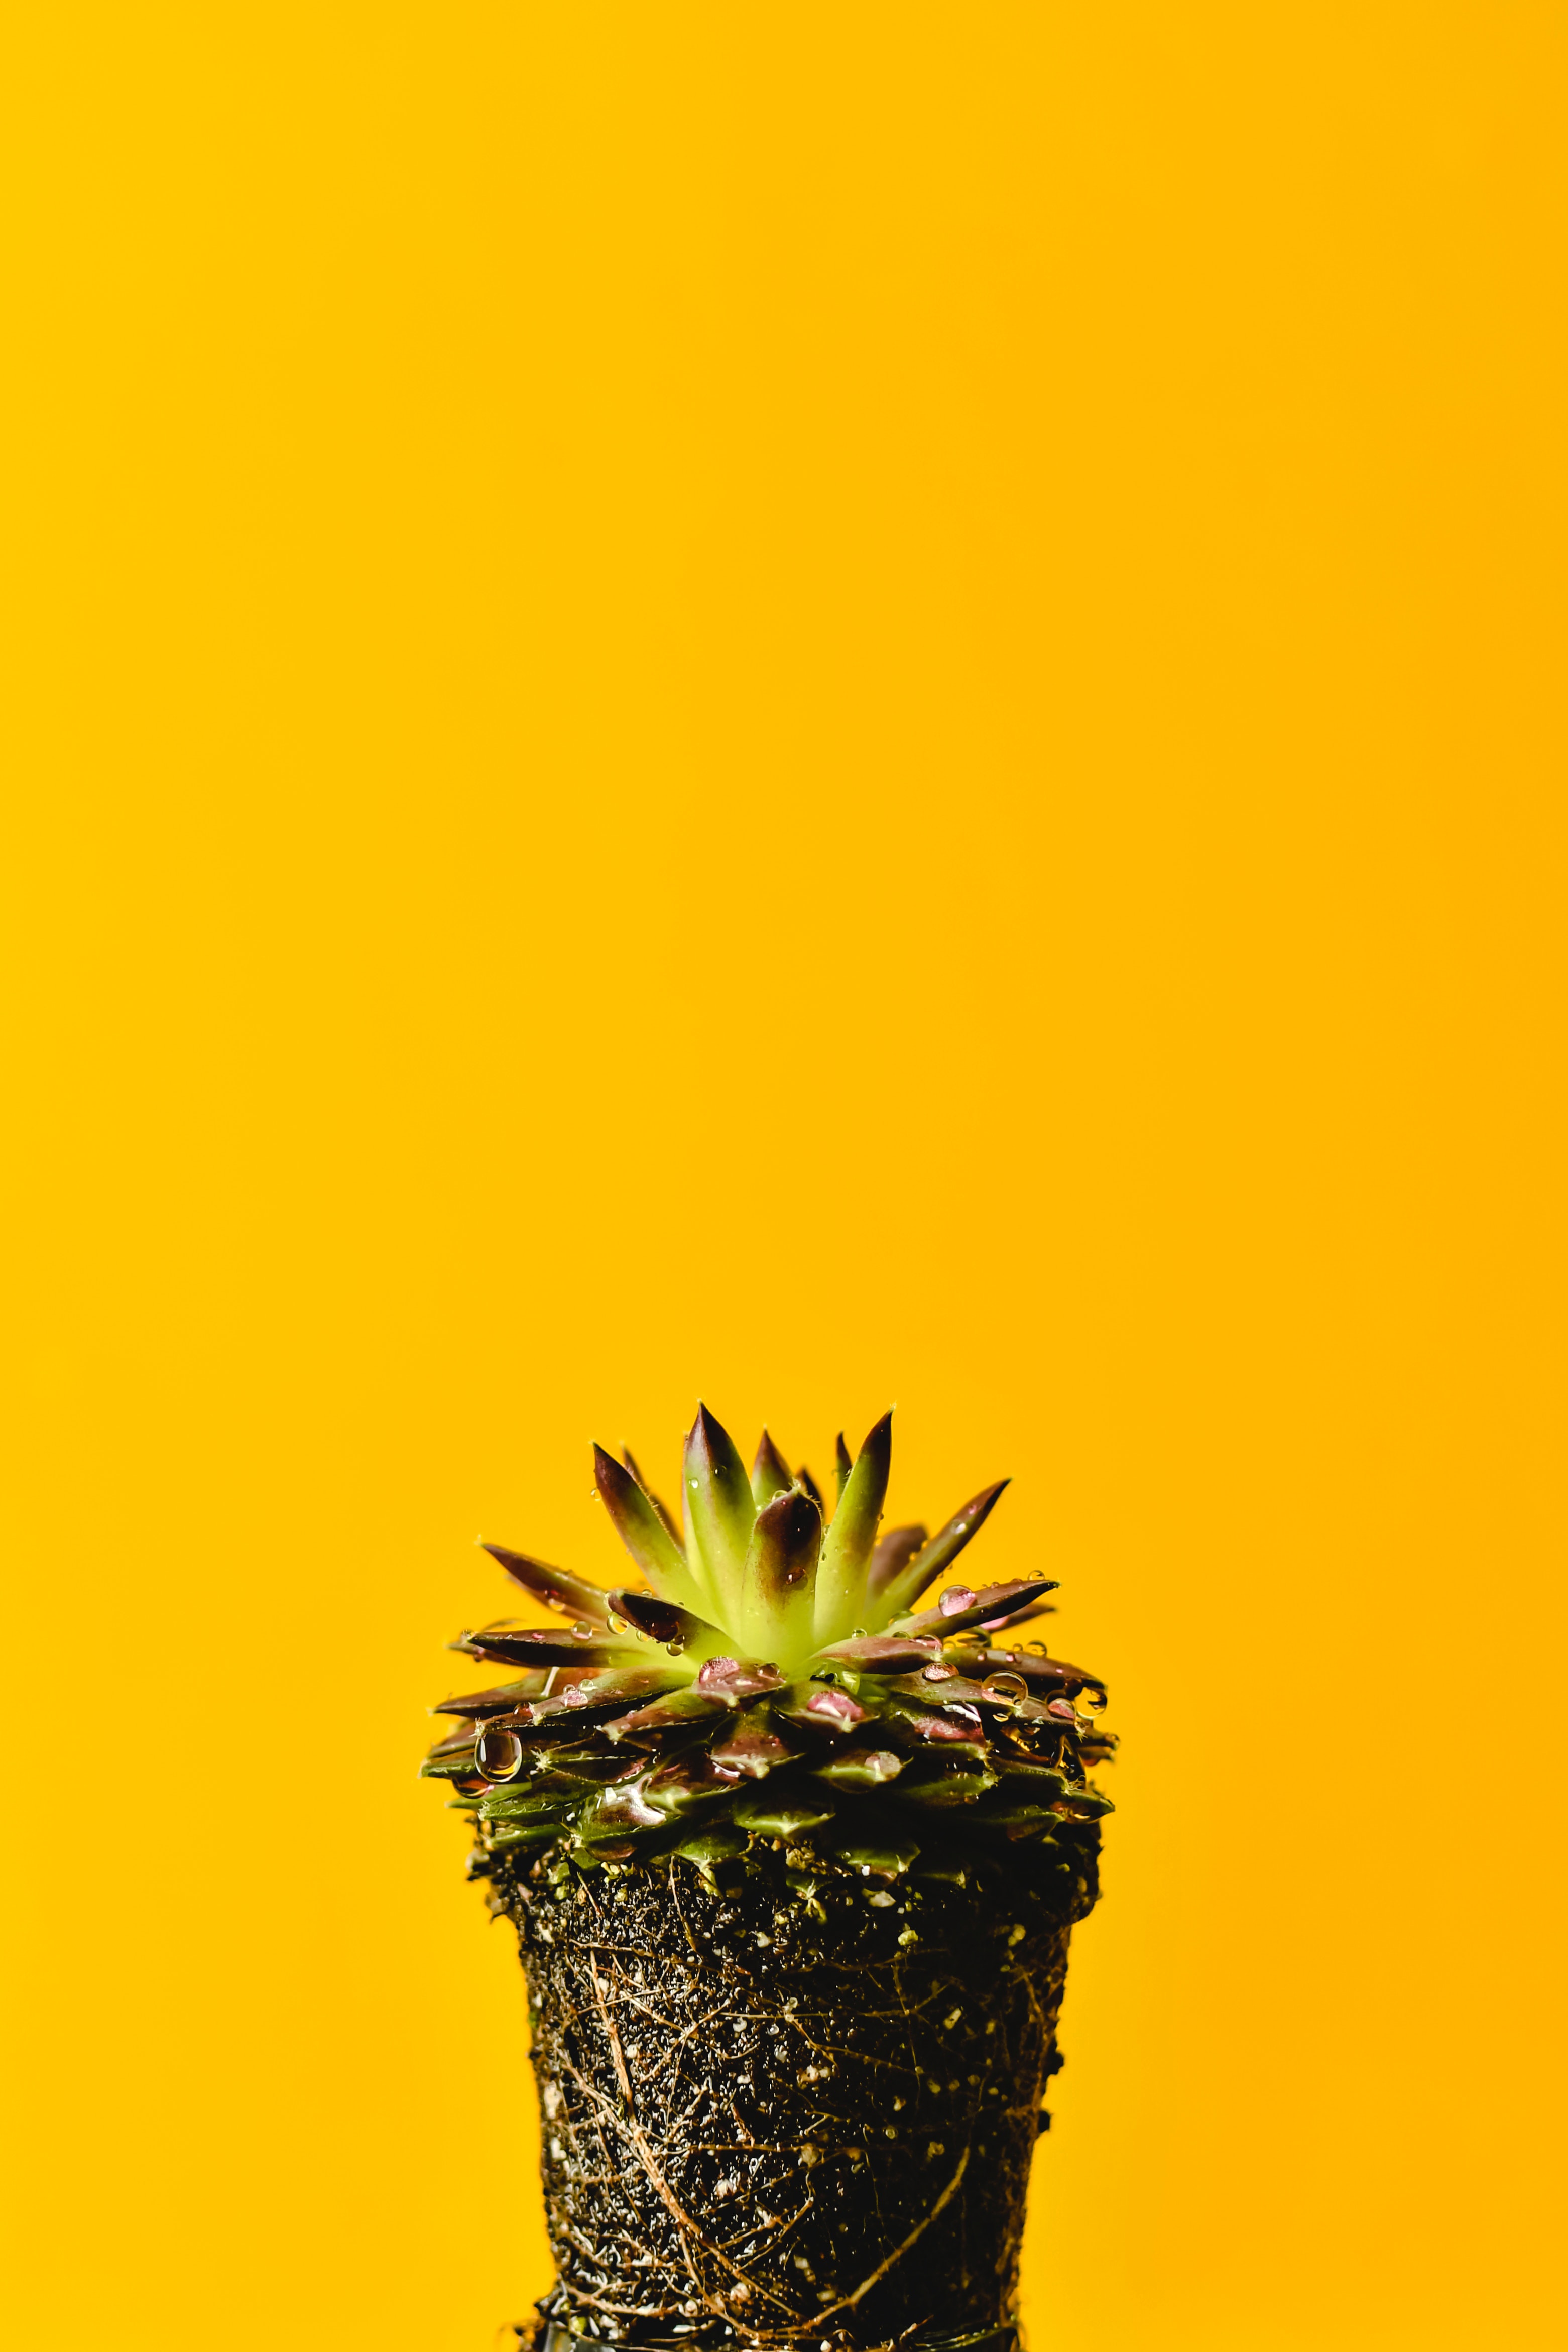 Cactus Mini Background Wallpaper Image For Free Download  Pngtree